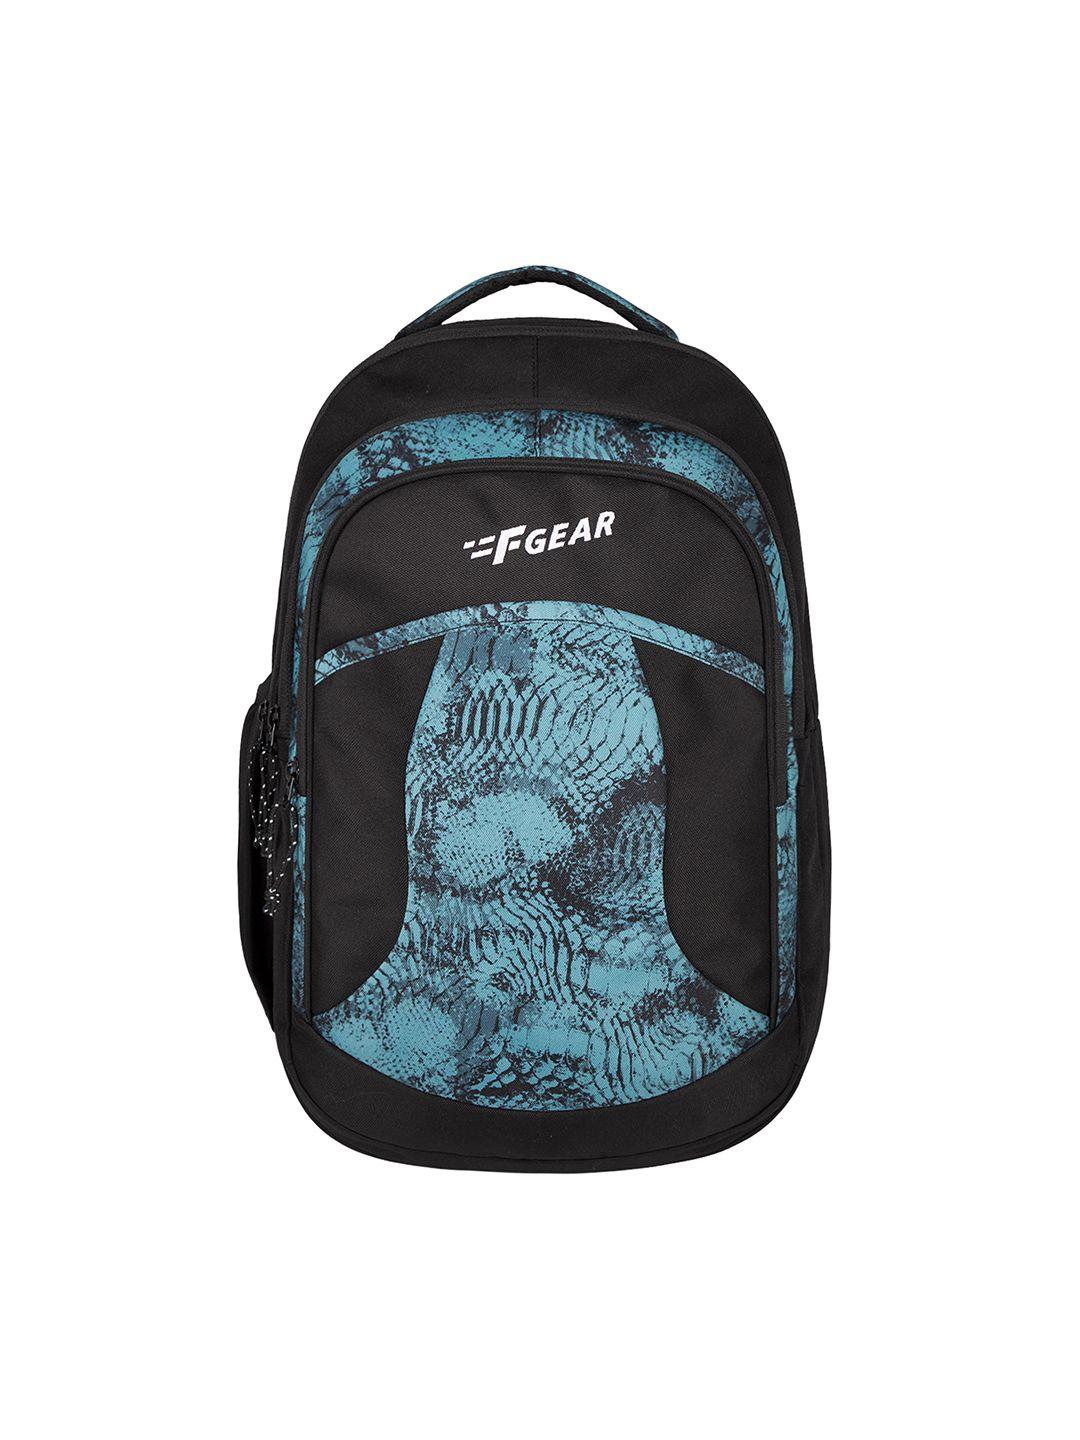 f gear graphic contrast detail backpack